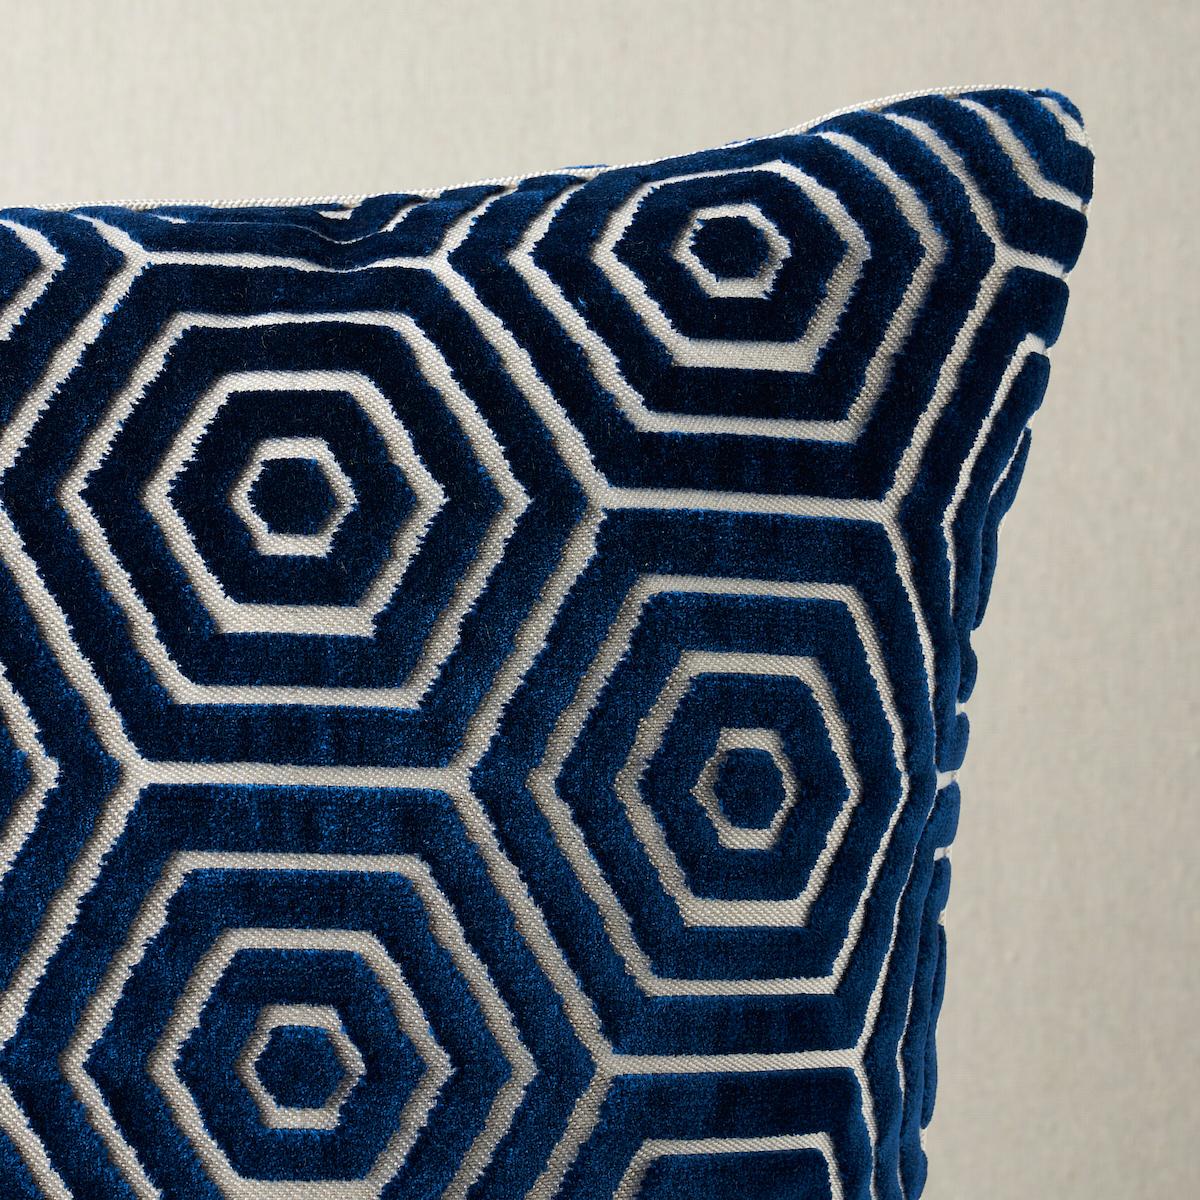 This pillow features Bees Knees Cut Velvet by Mary McDonald. An alluring combination of dense pile and flat ground weave, Mary McDonald’s Bees Knees Cut Velvet in navy is a mod geometric fabric design that makes a chic graphic statement. Pillow is